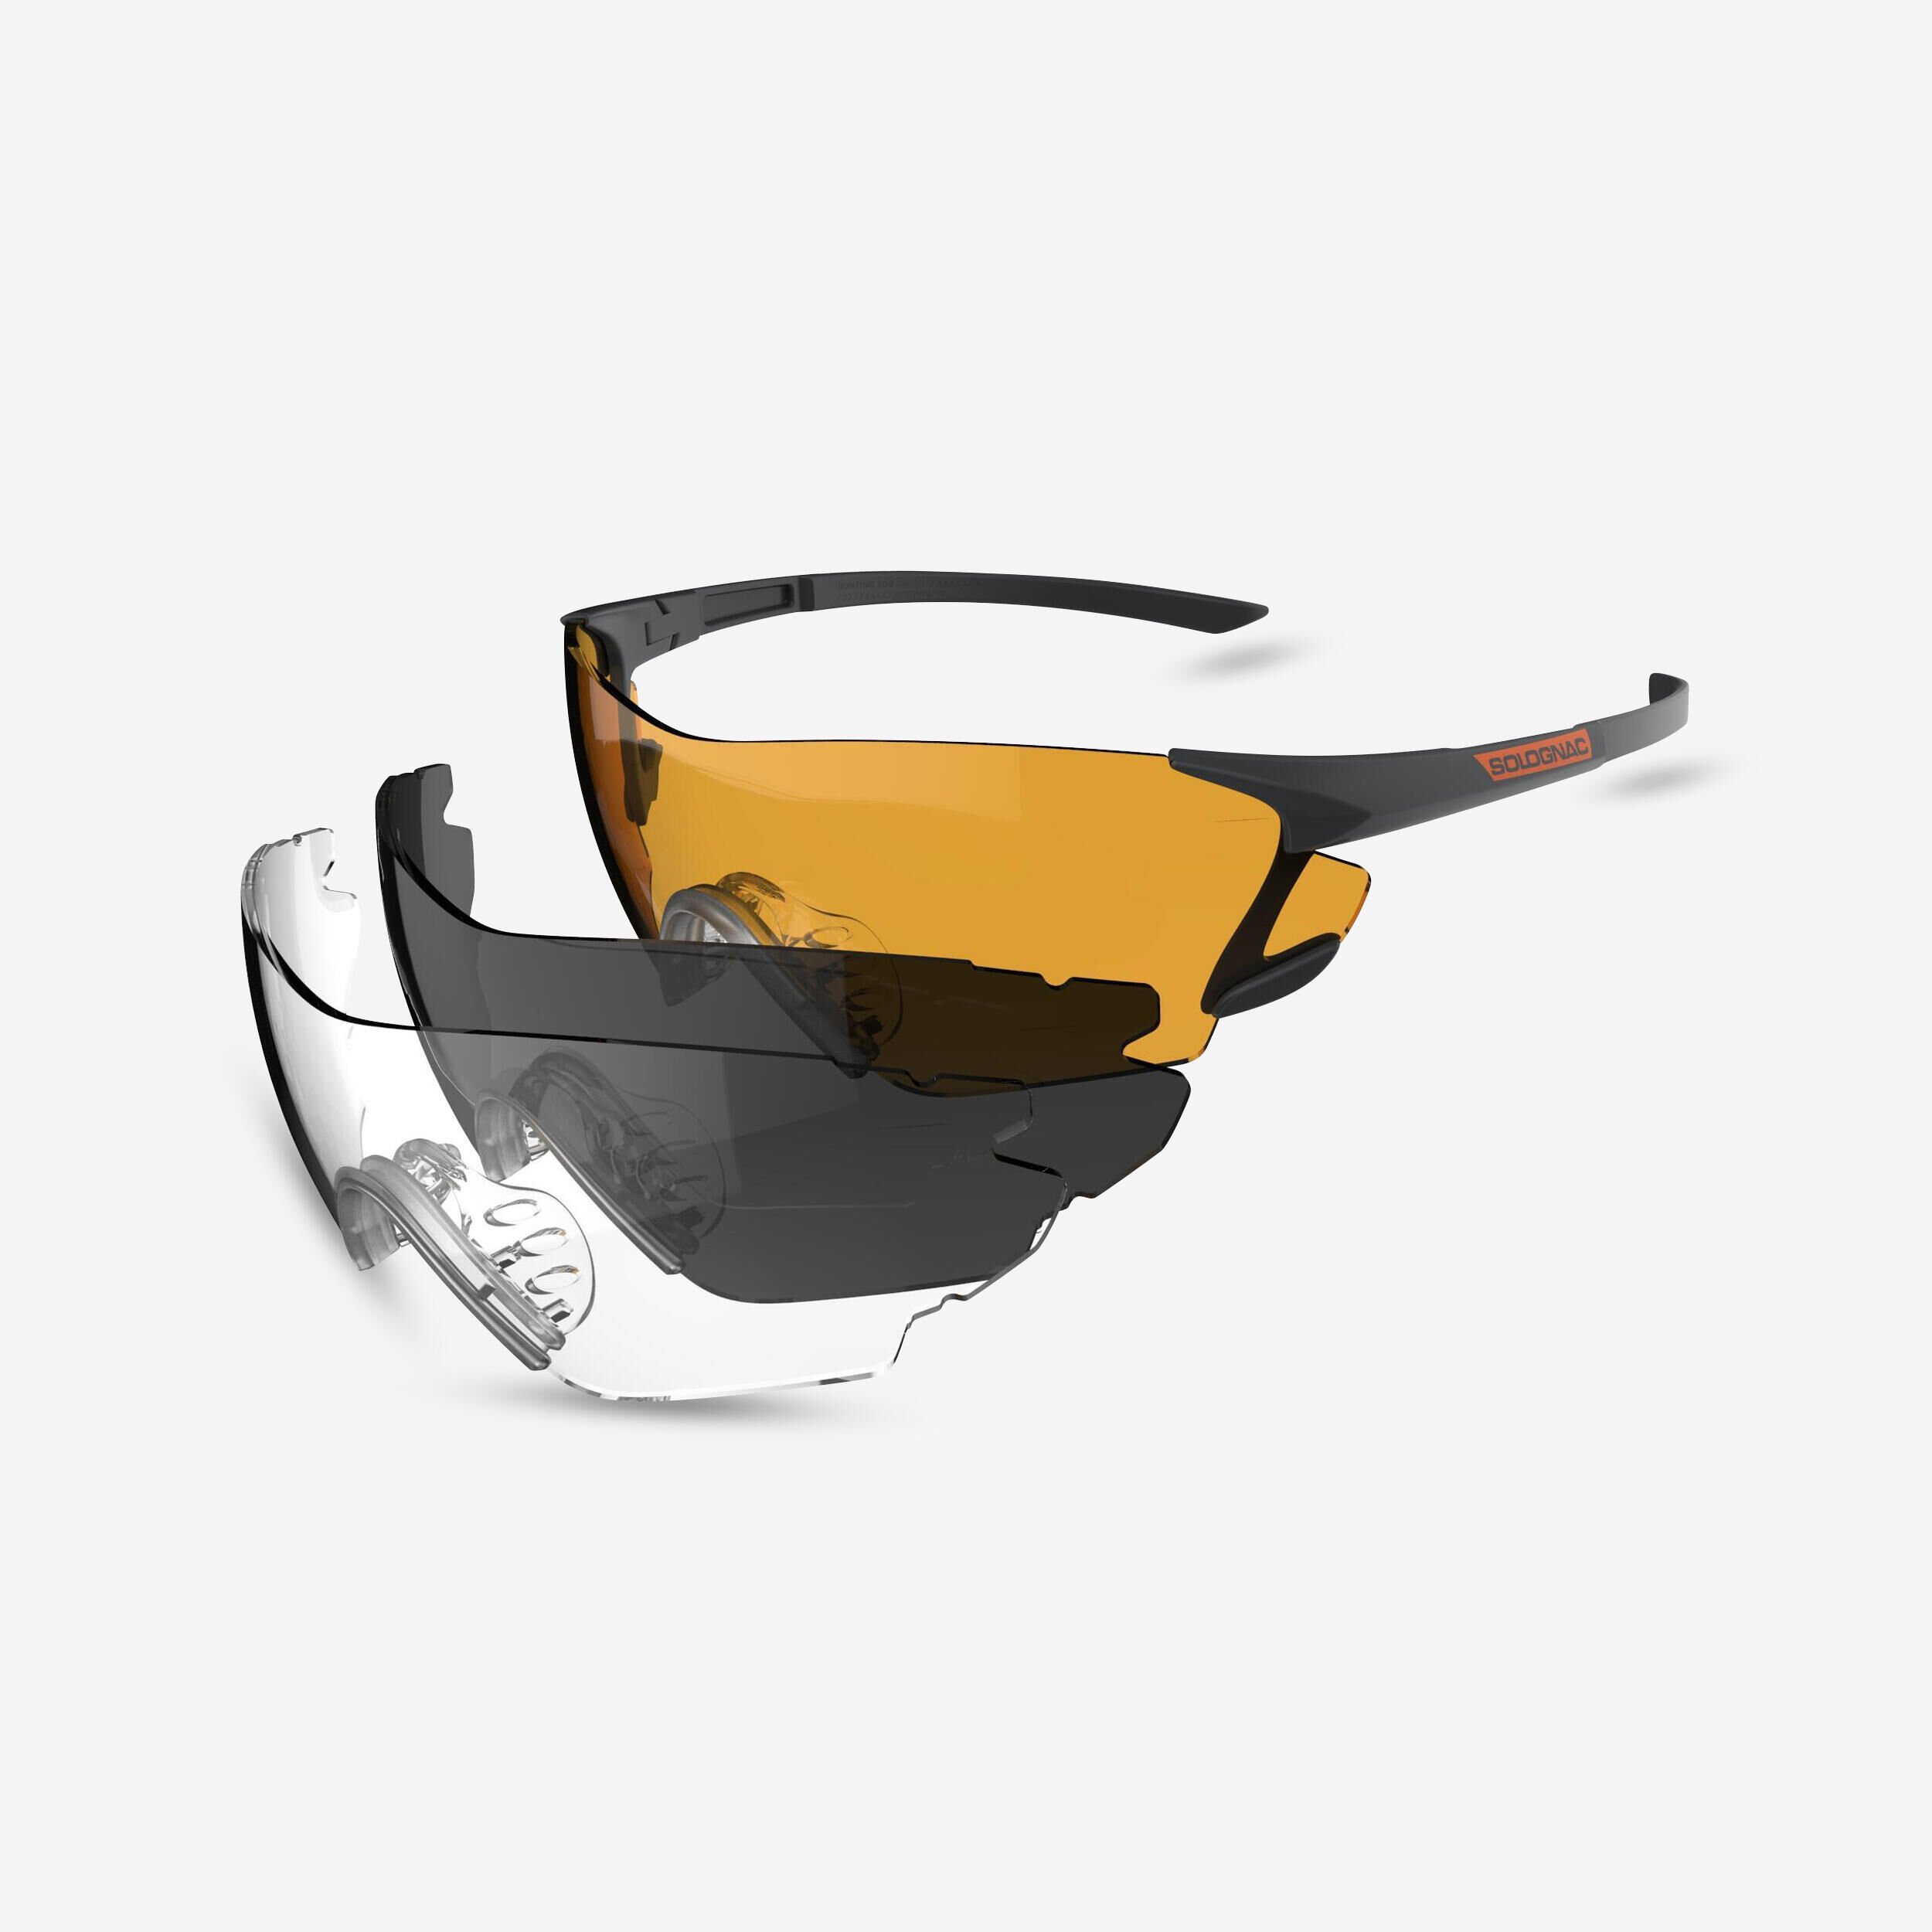 SOLOGNAC CLAY PIGEON SHOOTING SAFETY GLASSES KIT 100 PK3, 3 INTERCHANGEABLE SCREENS